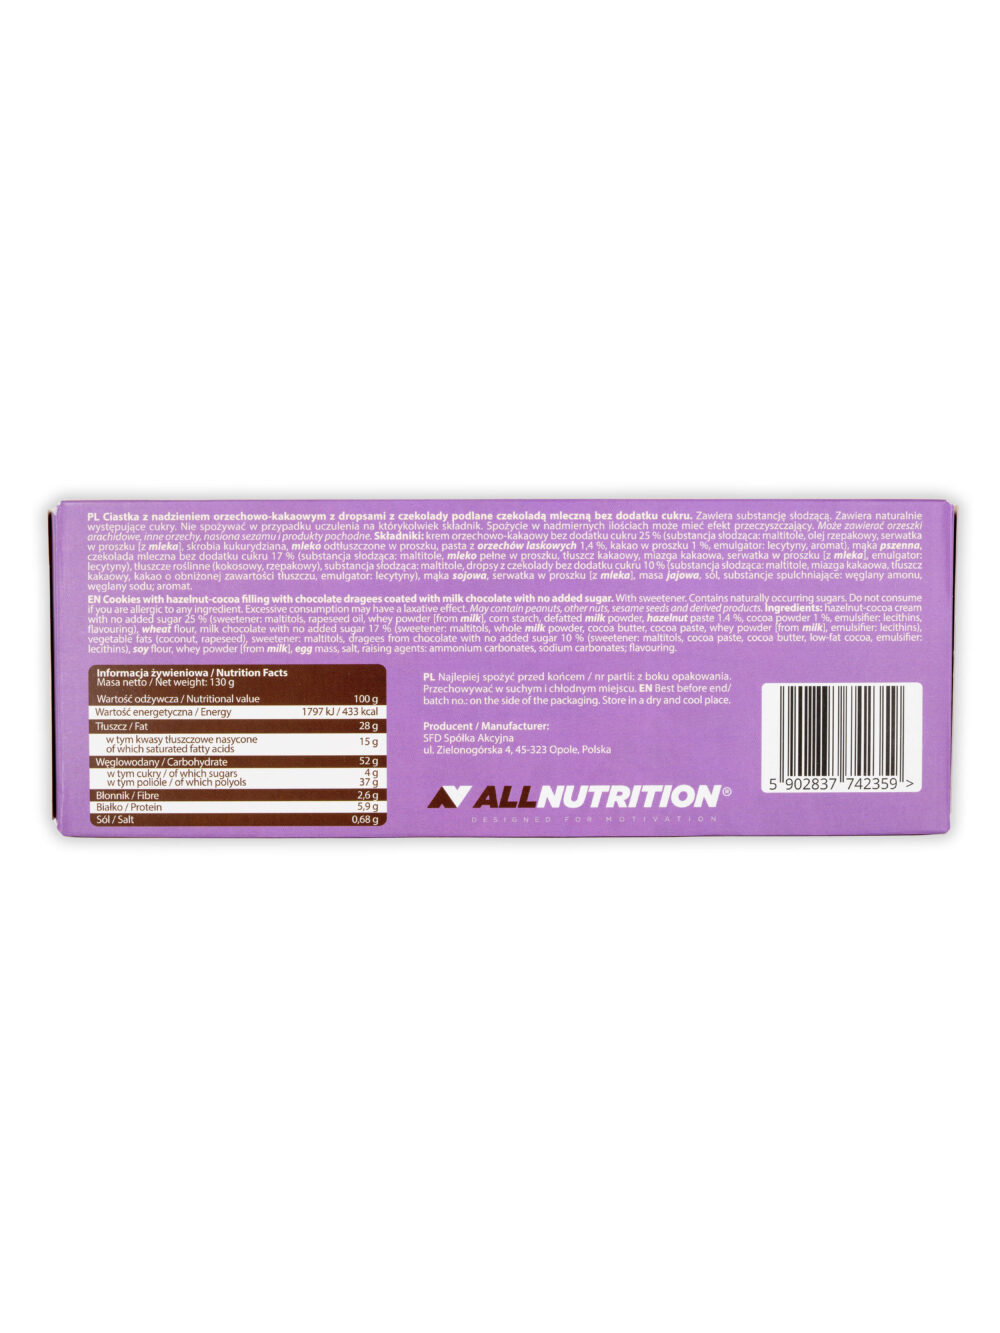 5902837742359 AllNutrition Cookies Cocolate chip BACK scaled